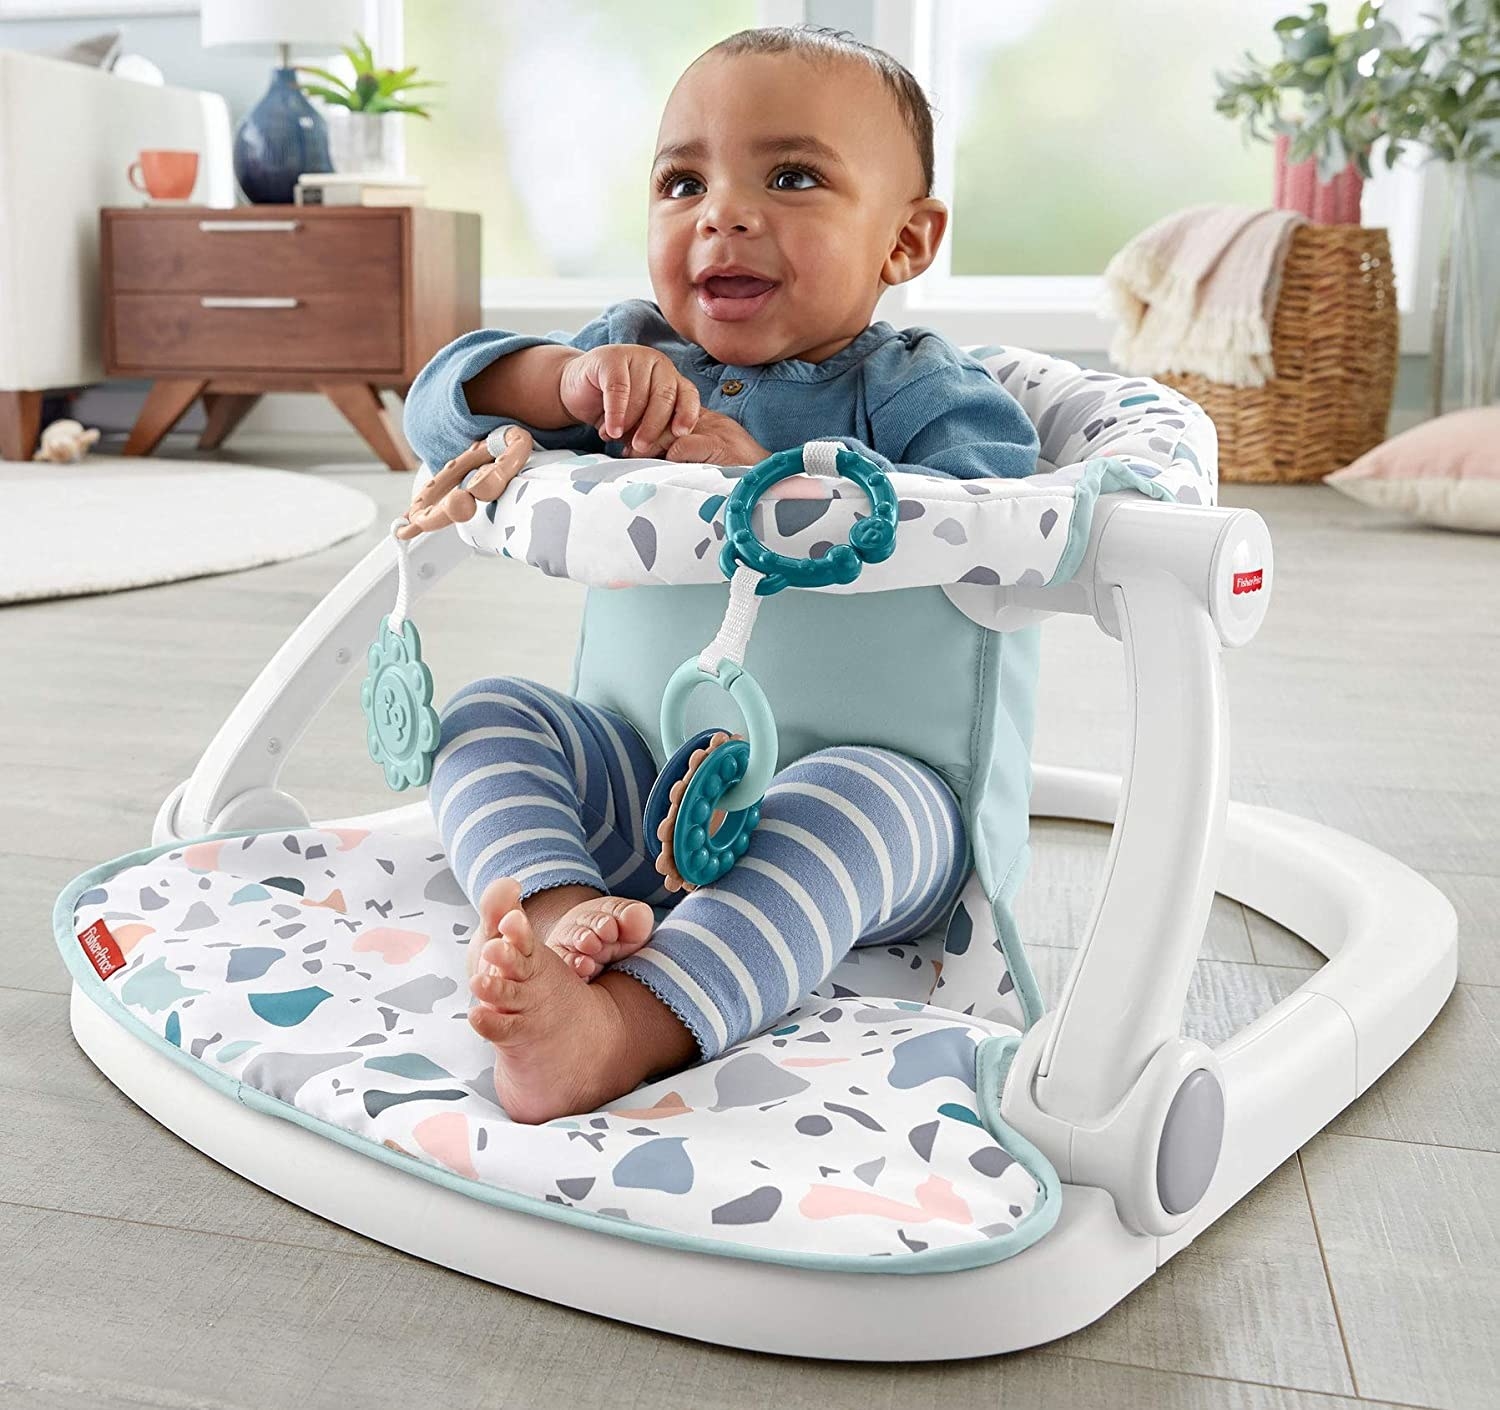 A baby in the baby chair in the middle of a living room